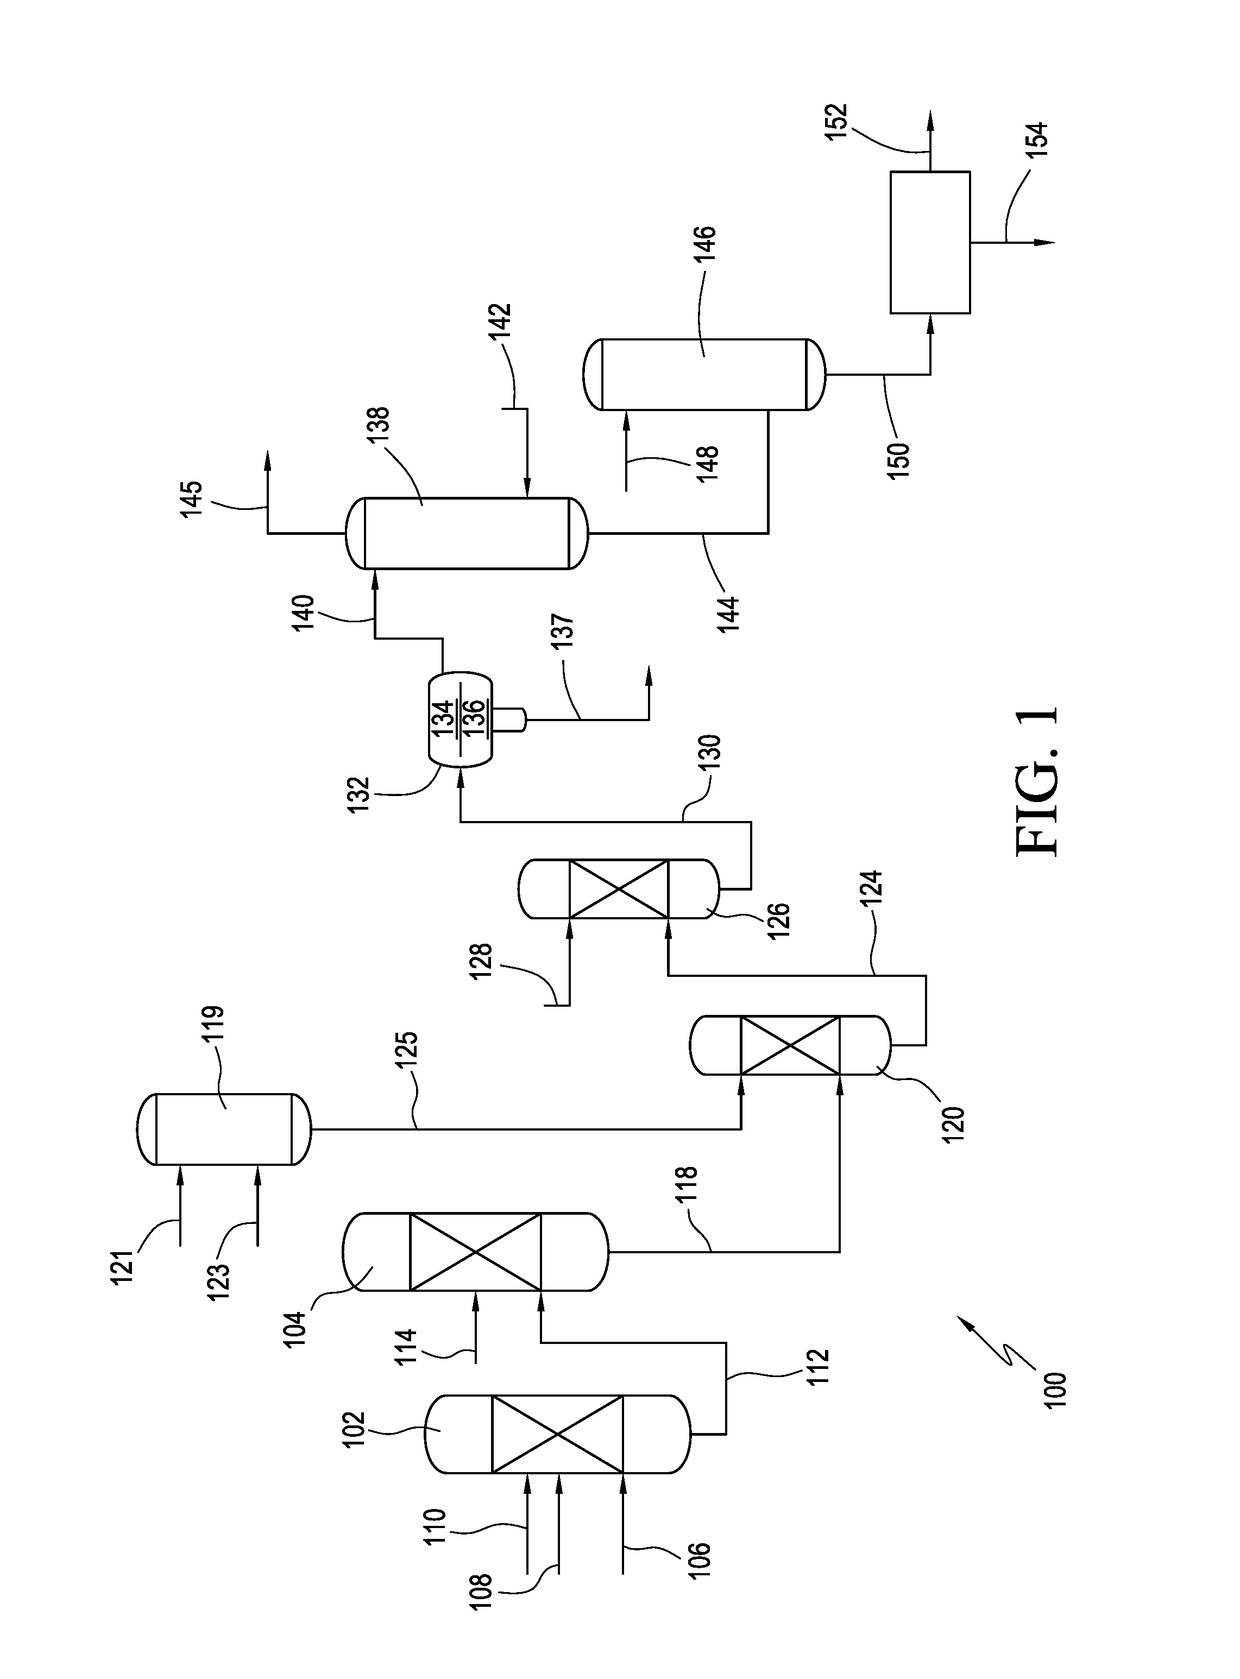 Acesulfame potassium compositions and processes for producing same